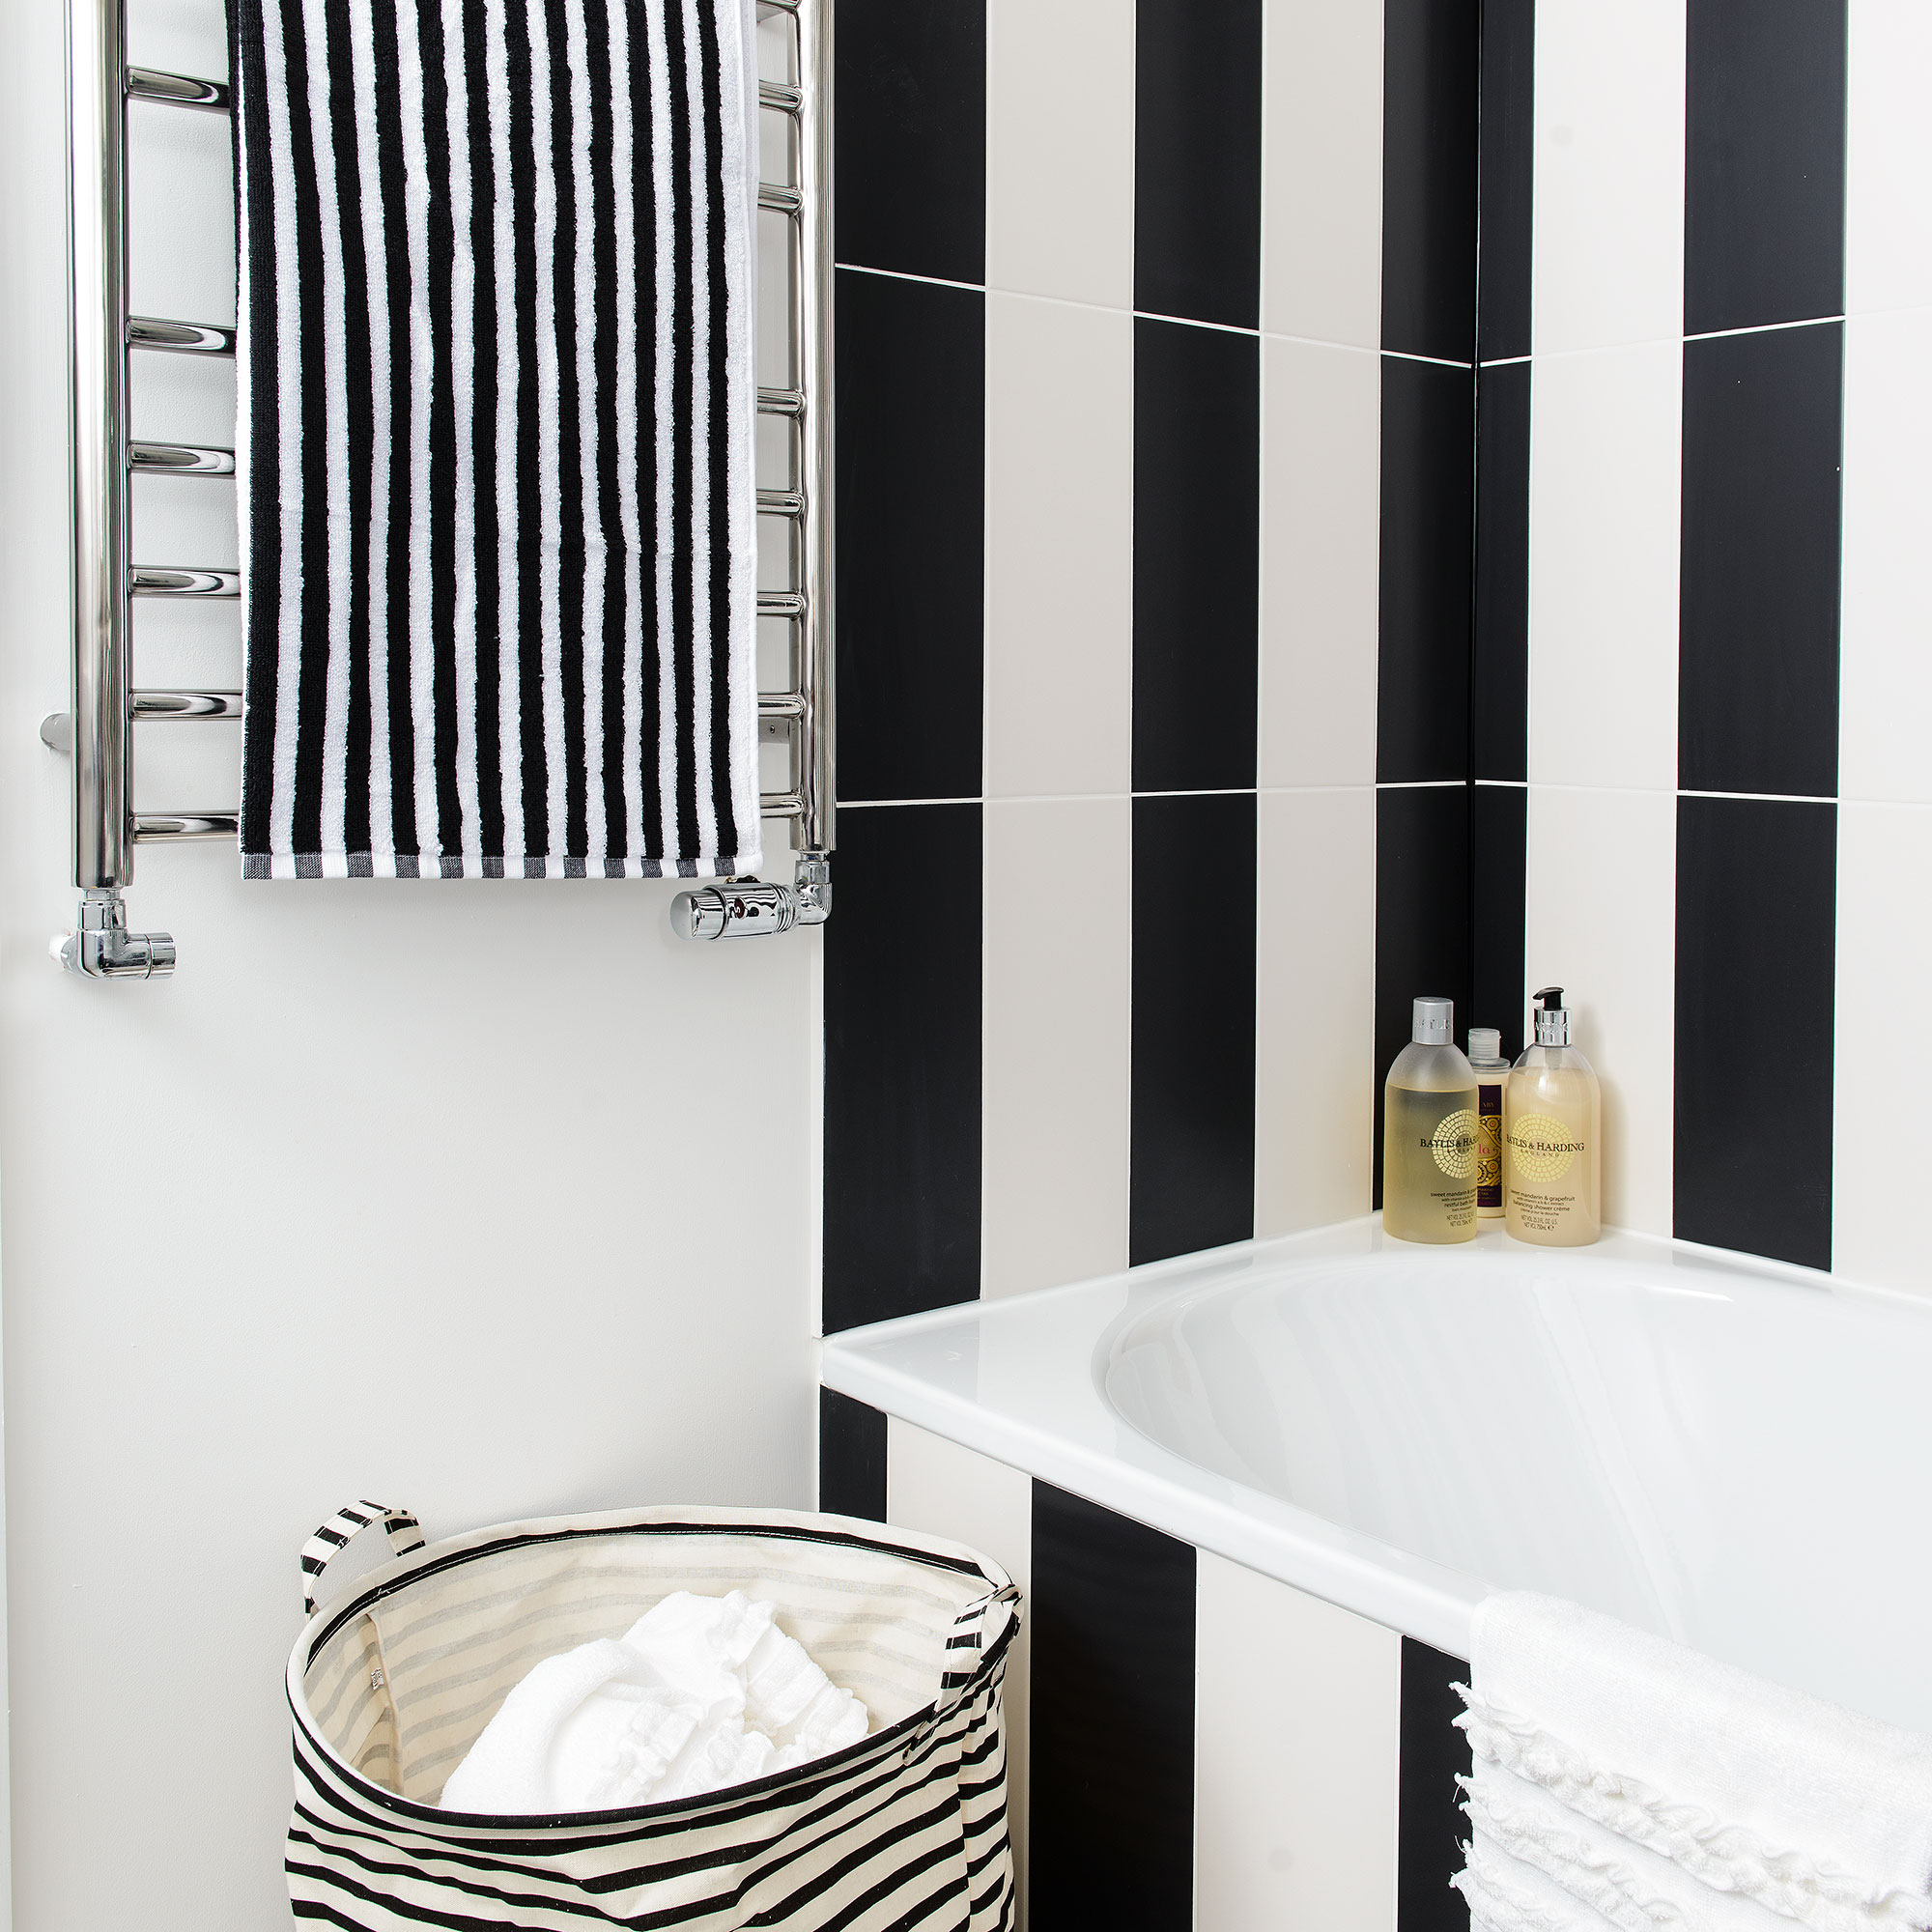 Bathroom with vertical black and white tile stripes